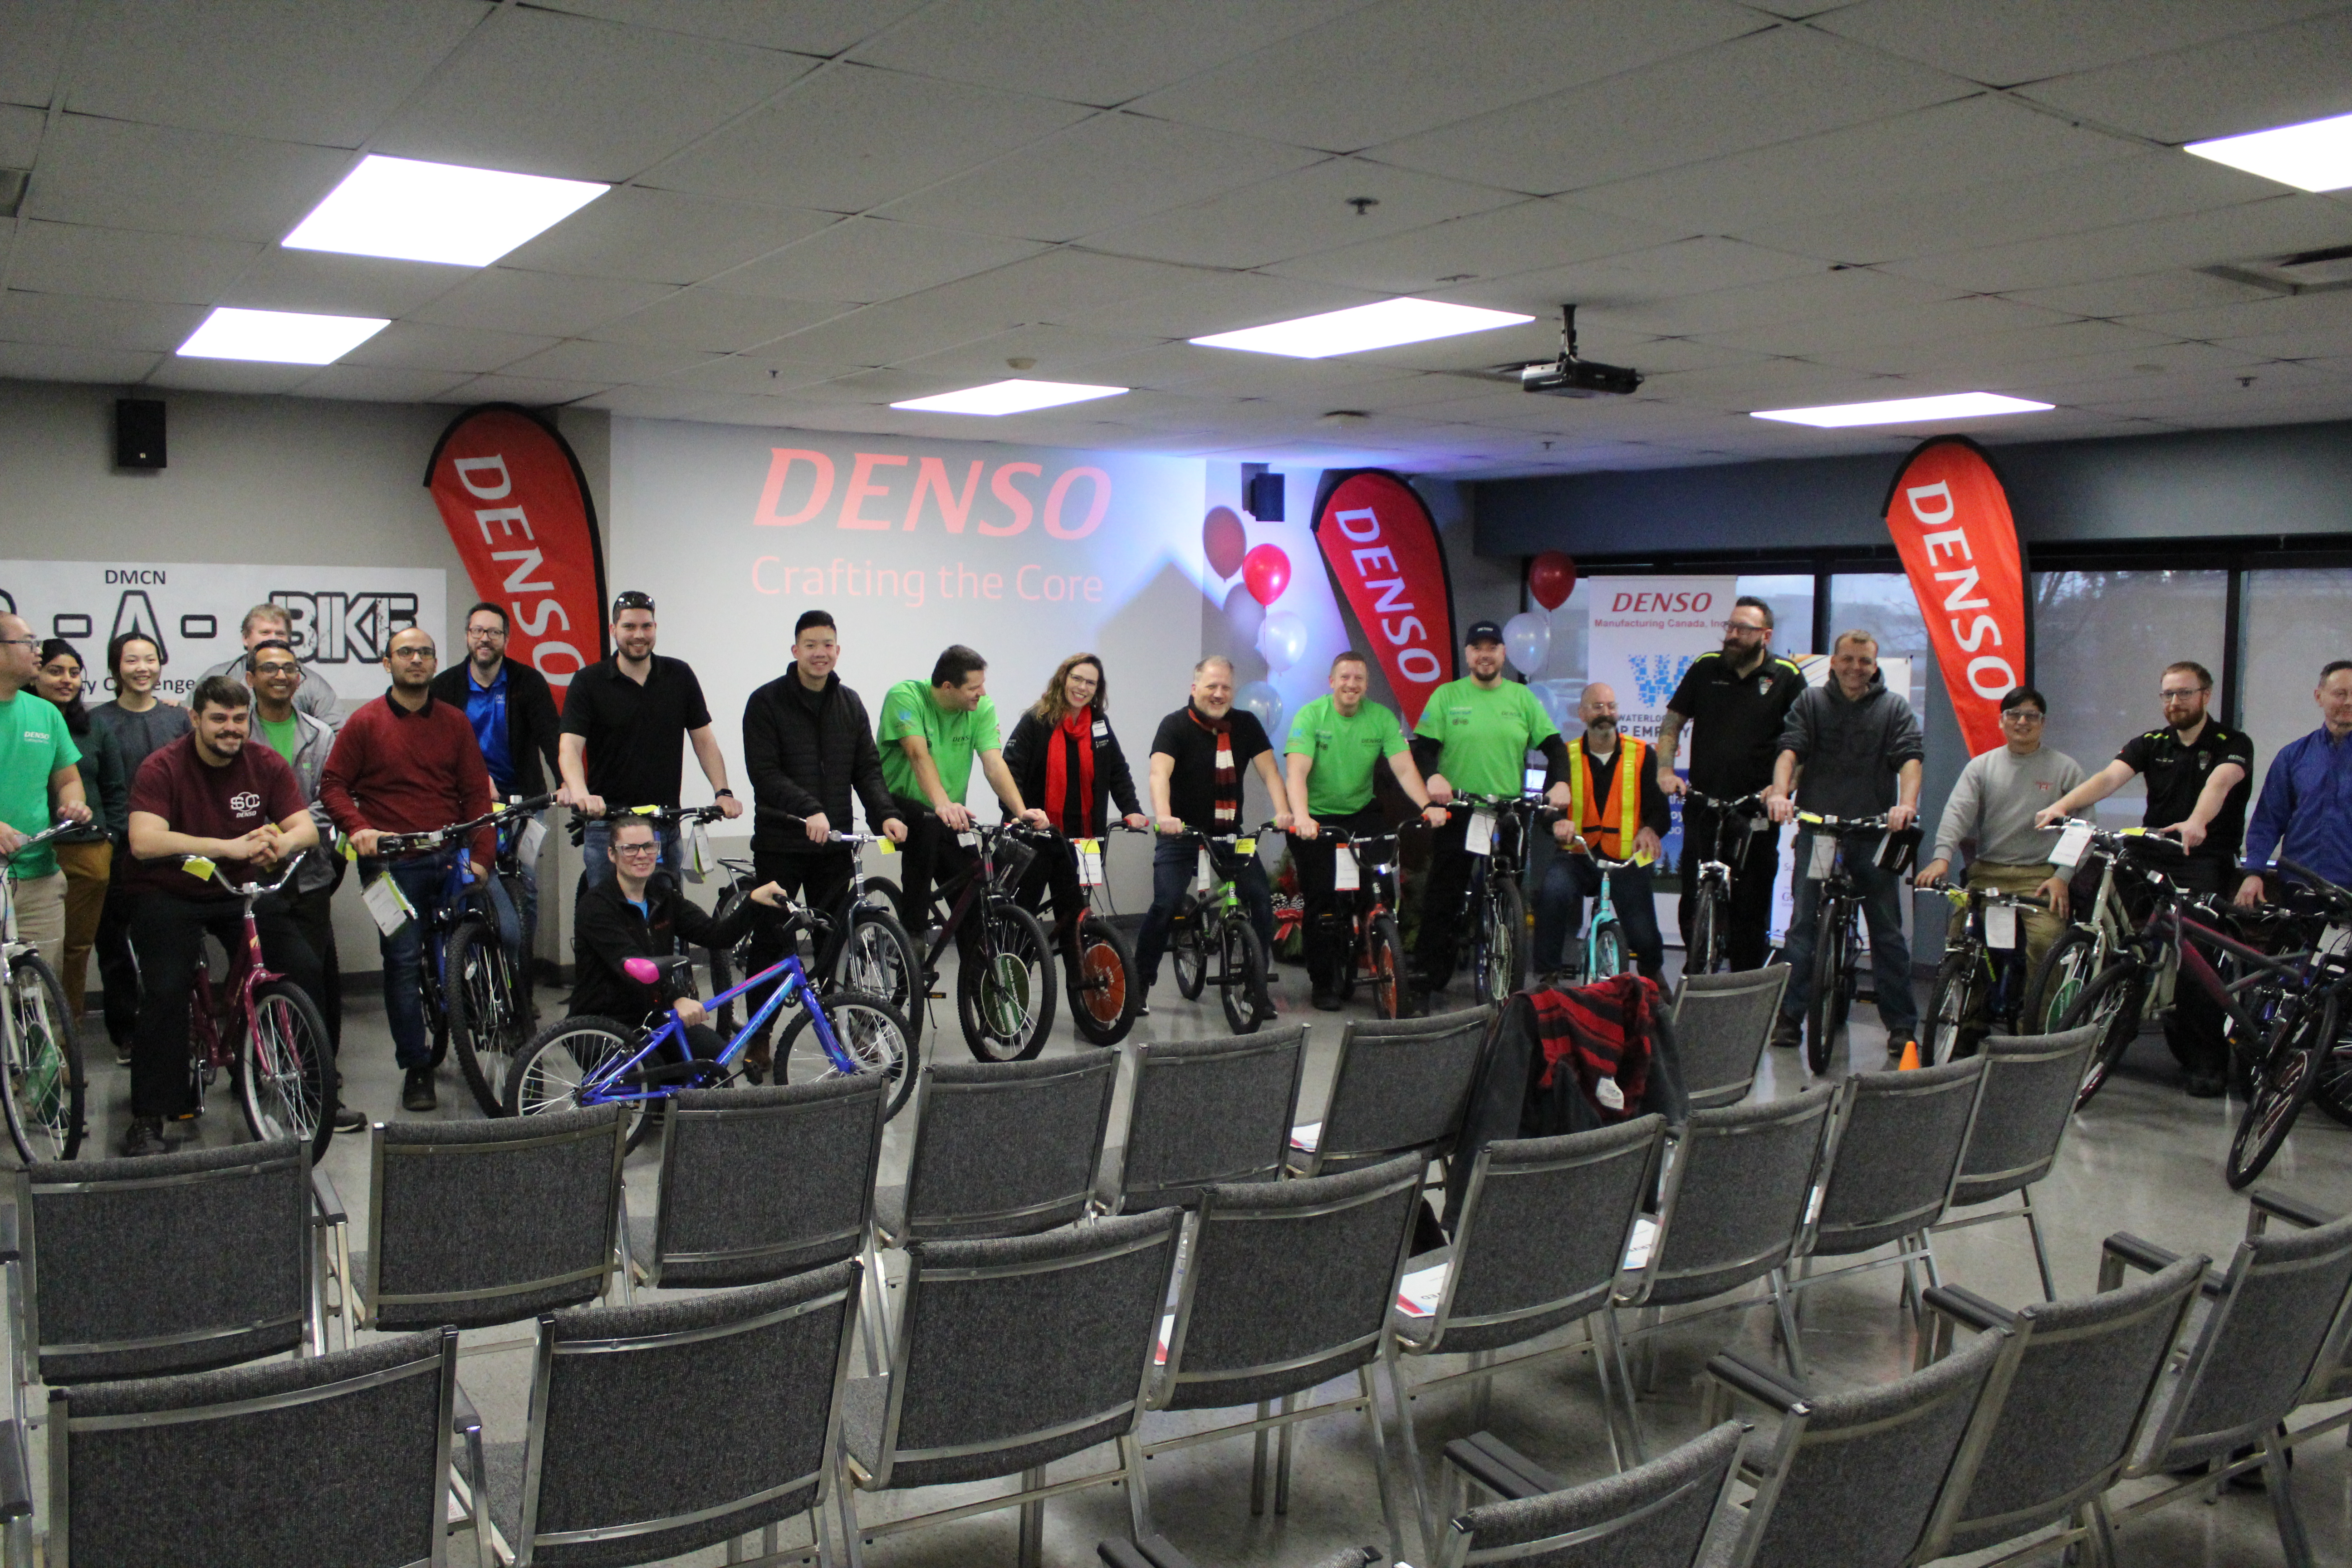 Group Photo with bikes